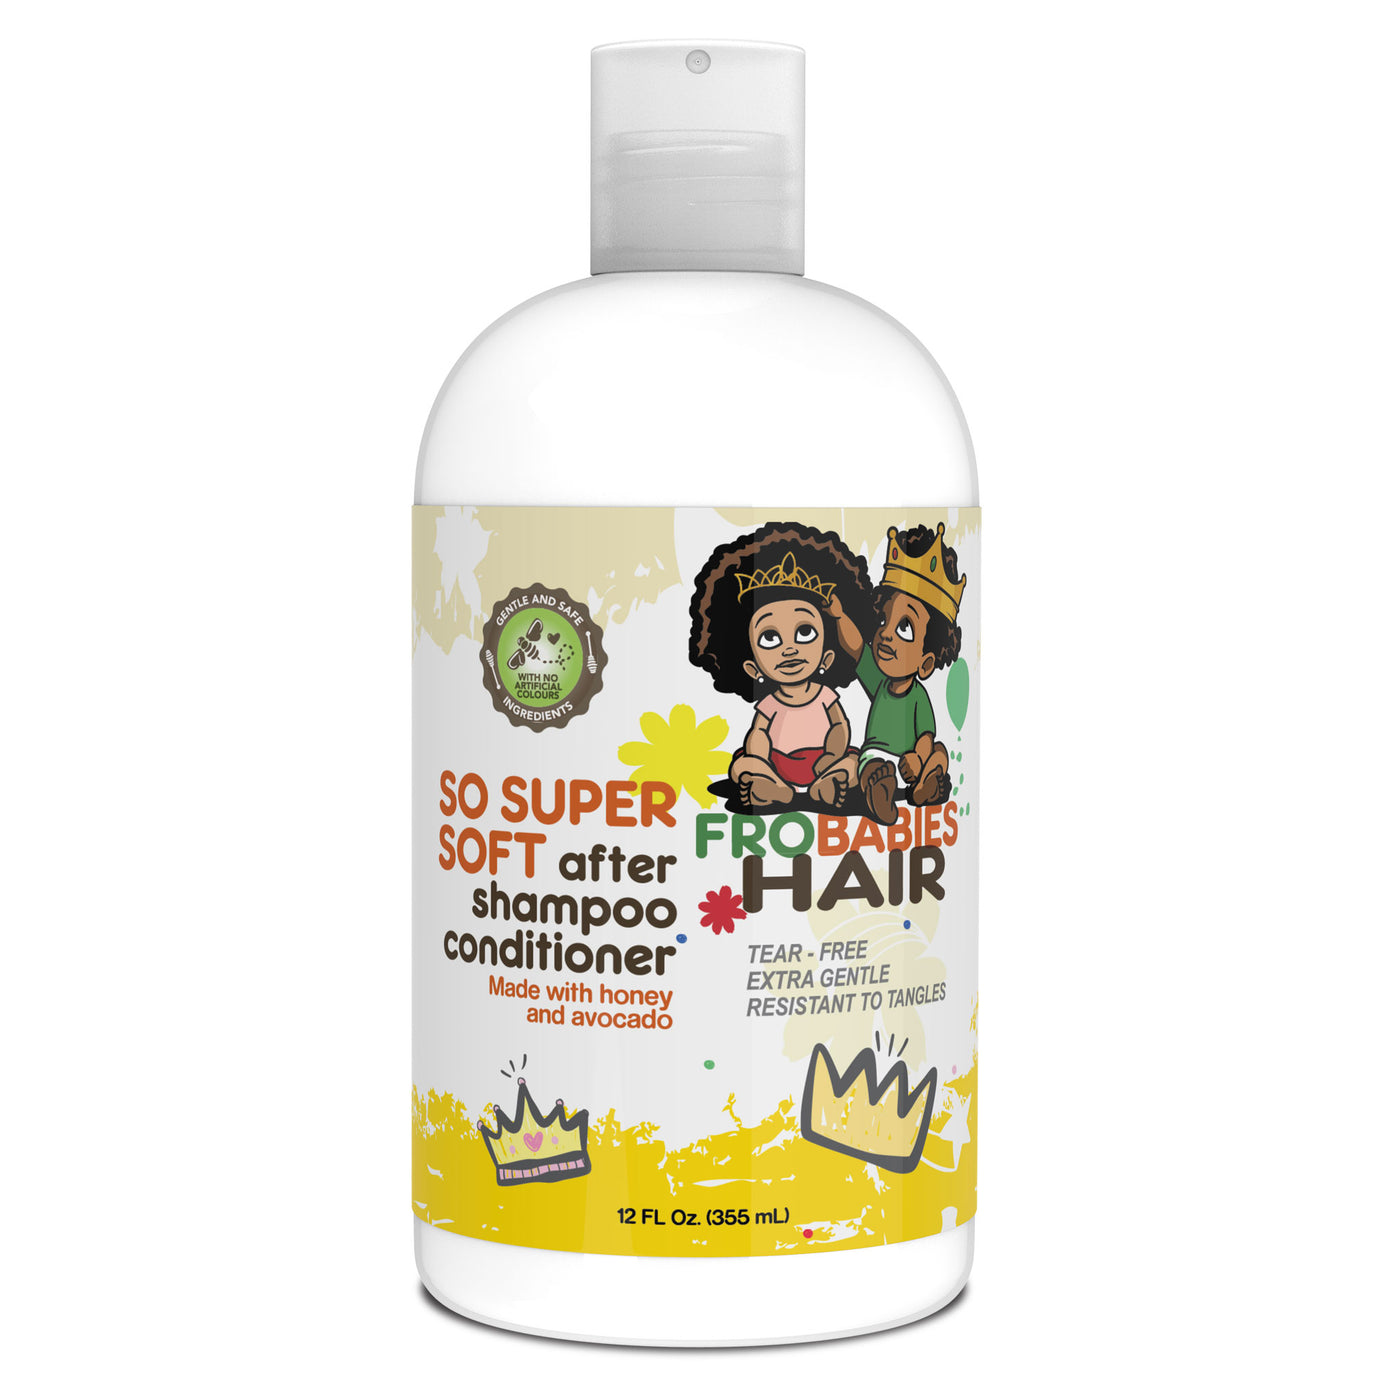 Soft After Shampoo Conditioner for Children | FroBabies Hair – frobabieshair.com